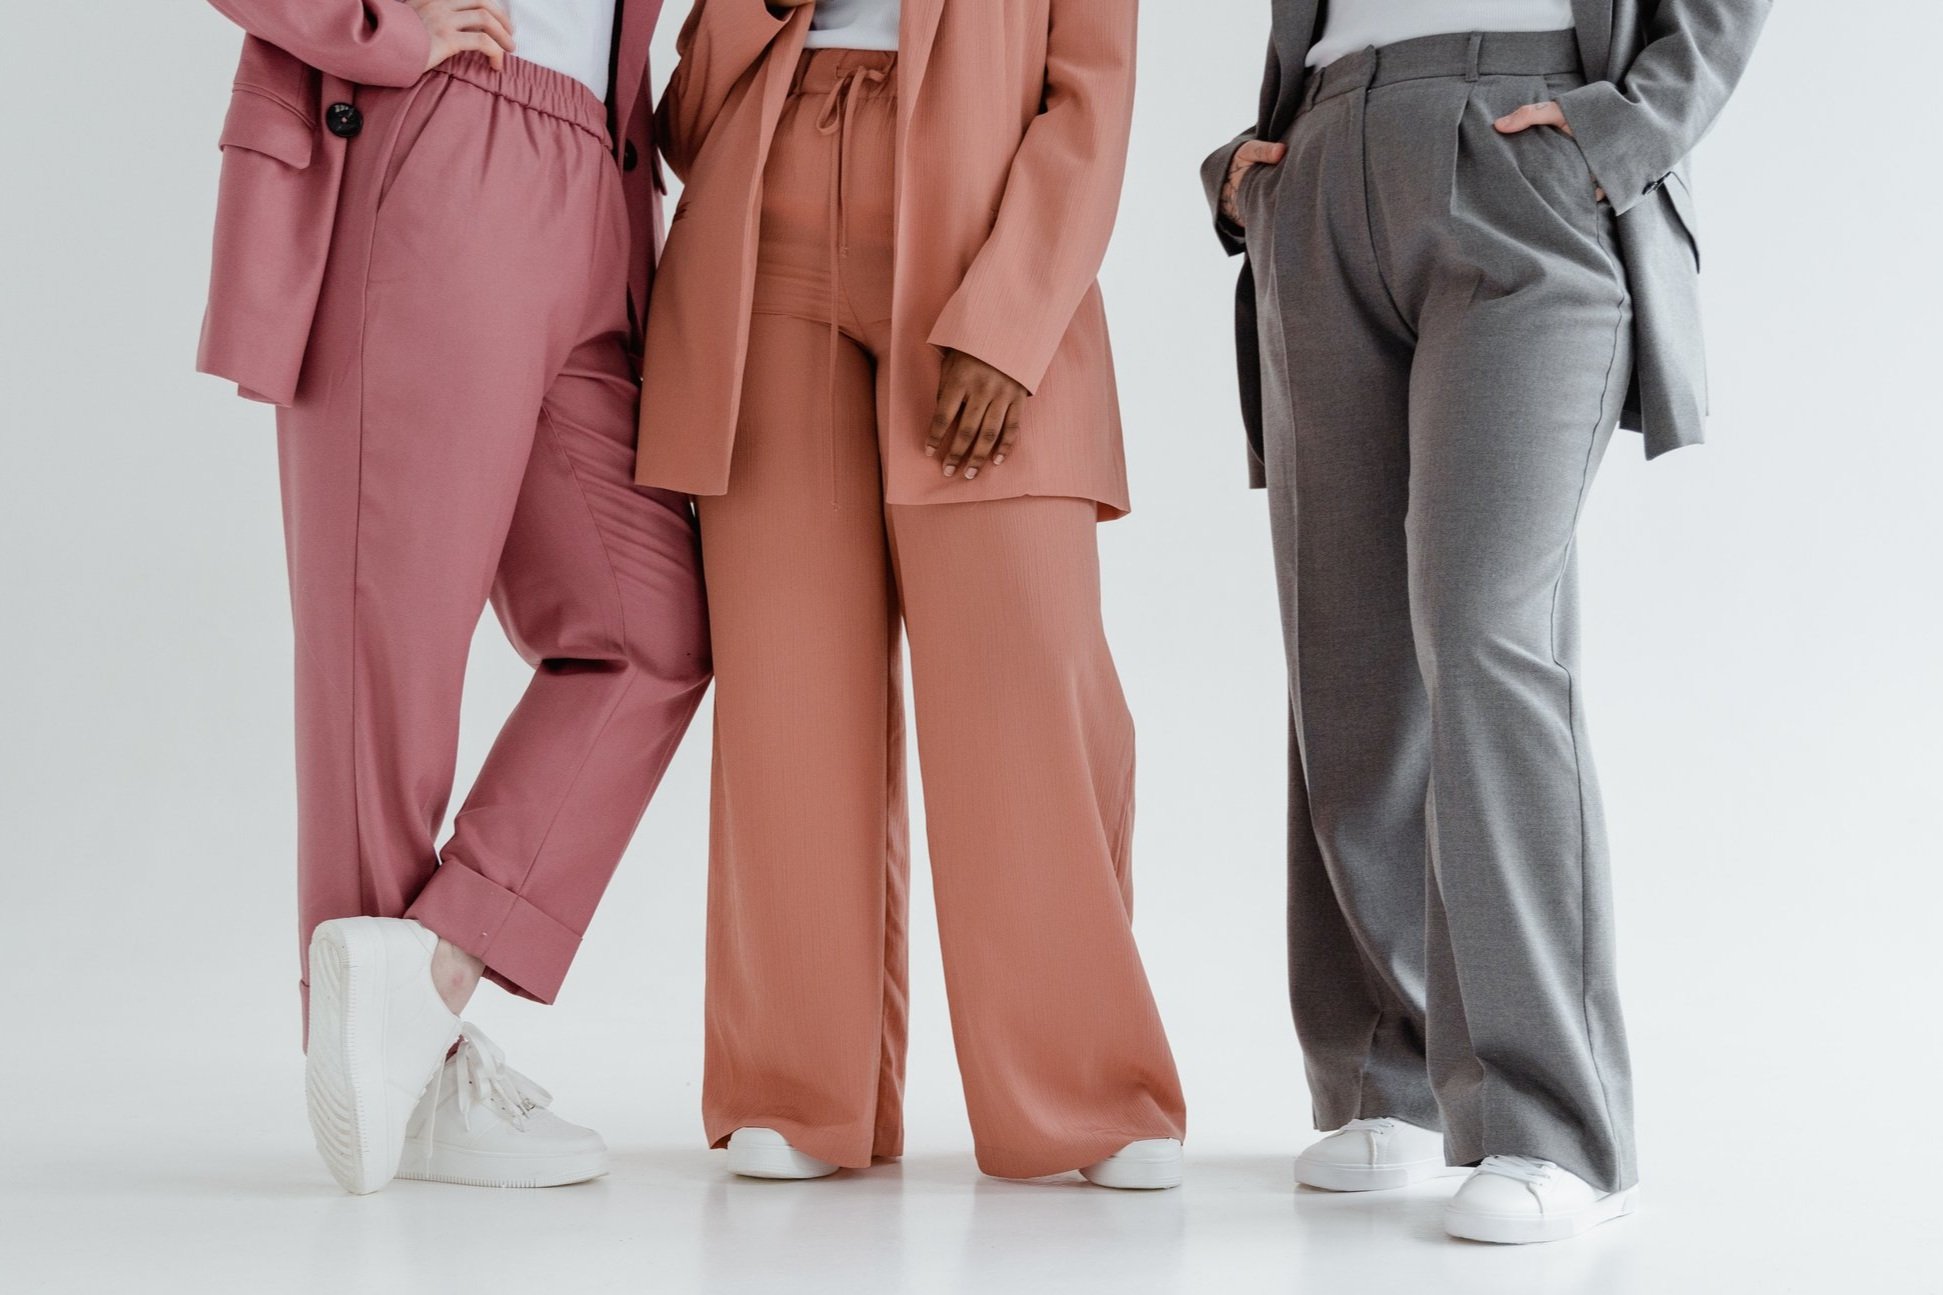 13 Pairs Of Pants That Will Actually Fit Your Butt — The Candidly